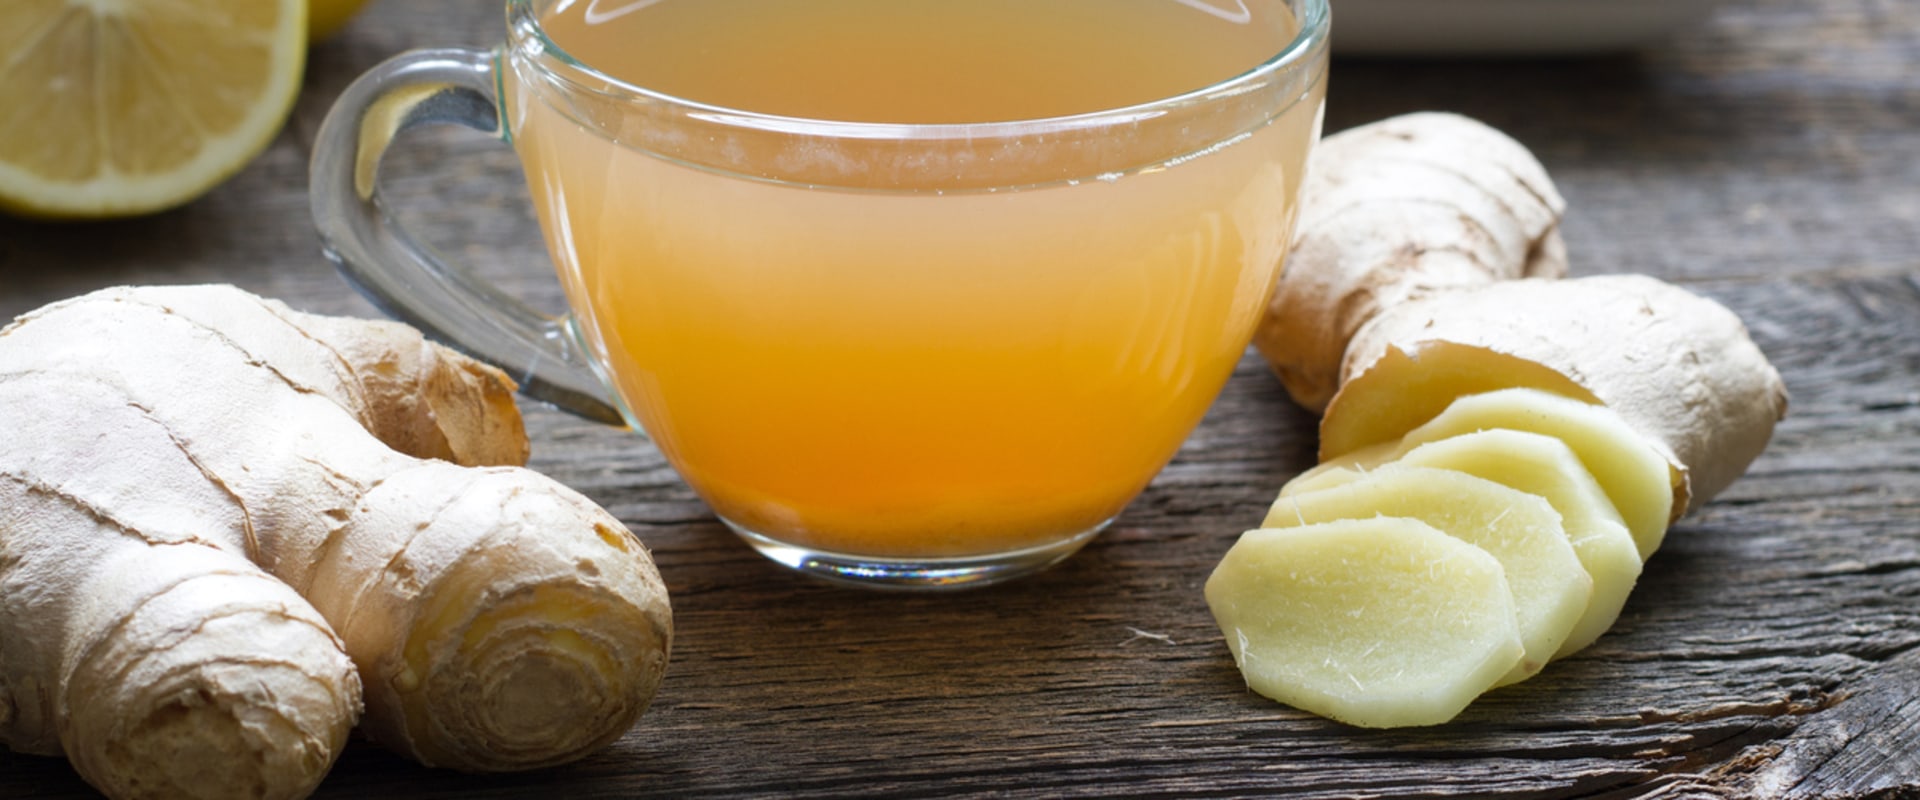 Ginger: A Natural Remedy for High Temperature